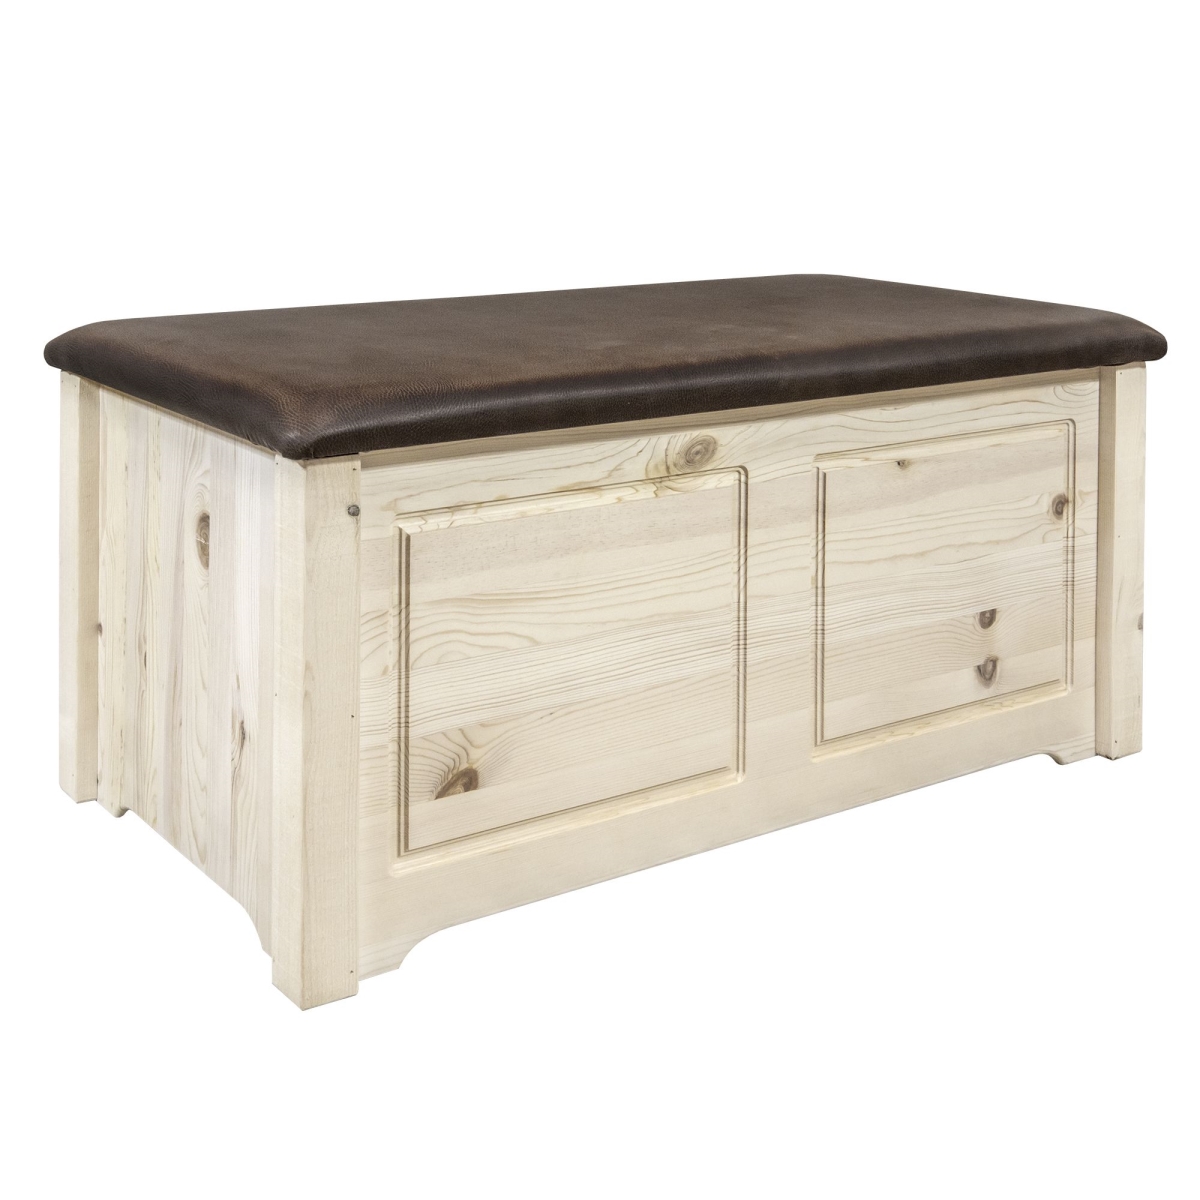 Picture of Montana Woodworks MWHCSBCSVSADD Homestead Collection Small Blanket Chest, Saddle Upholstery, Clear Lacquer Finish